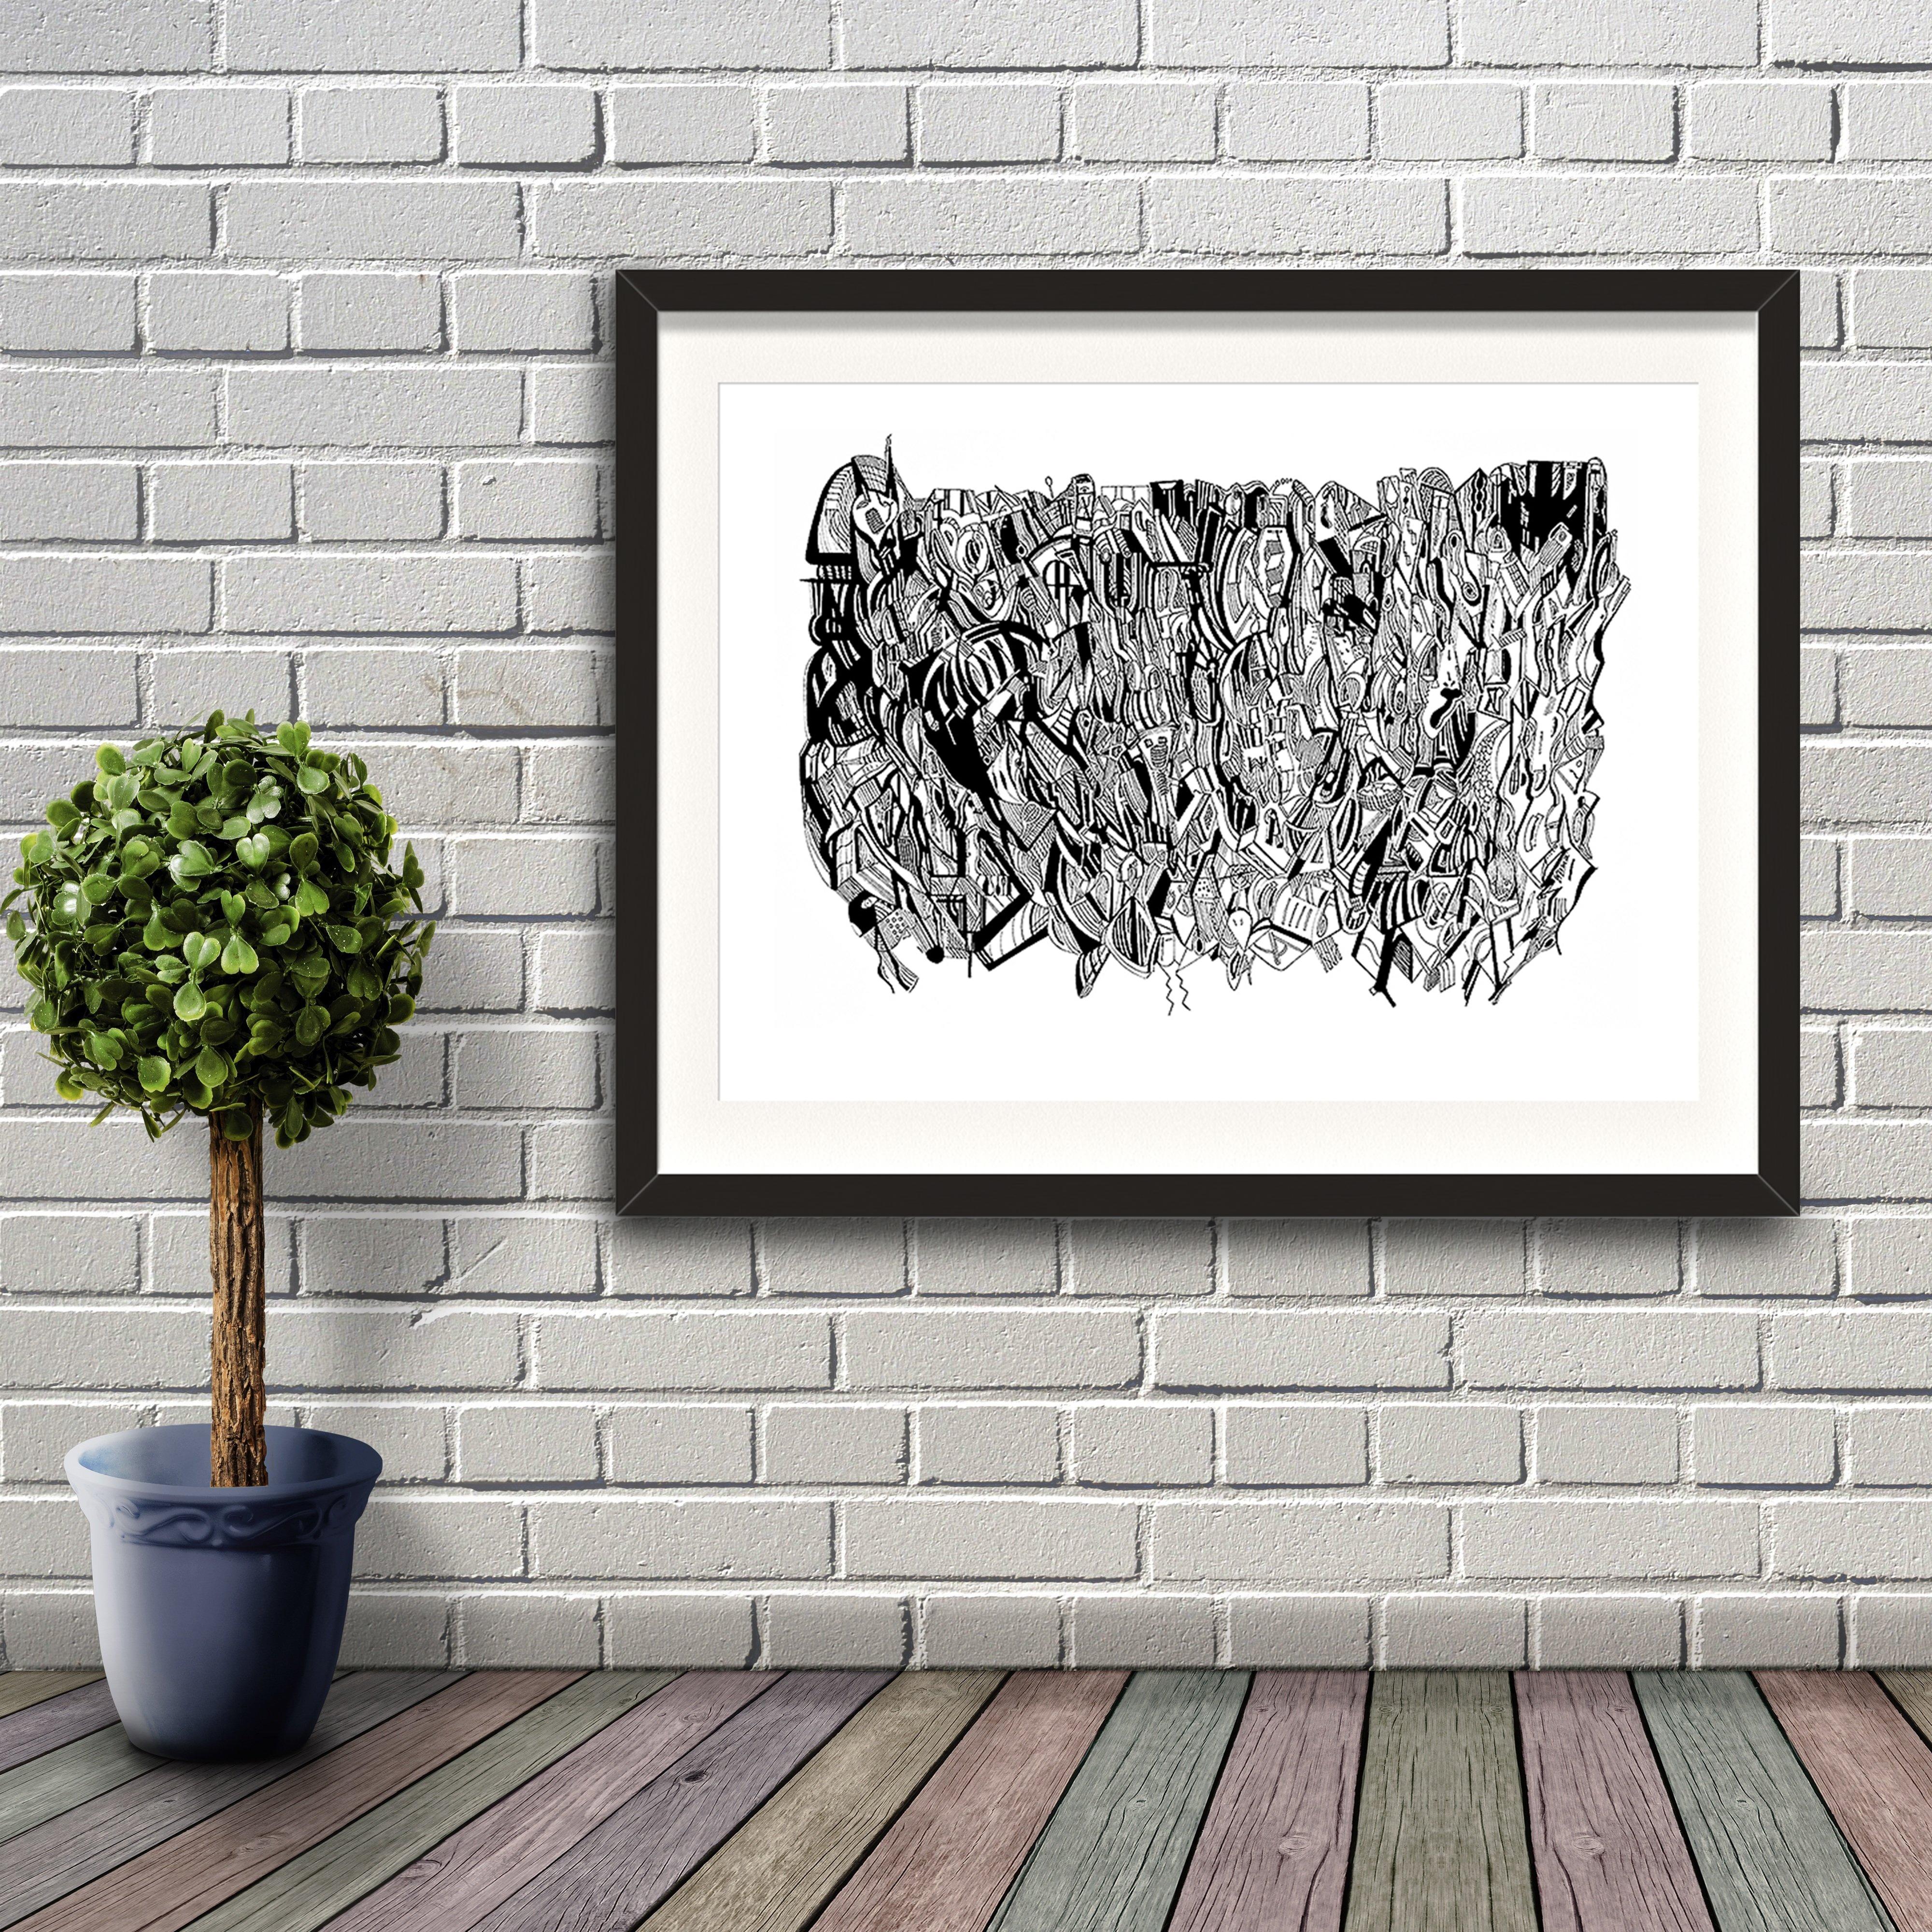 A fine art print from Jason Clarke titled Nightmare drawn with a black Pentel pen. Artwork shown in a black frame hanging on a brick wall.